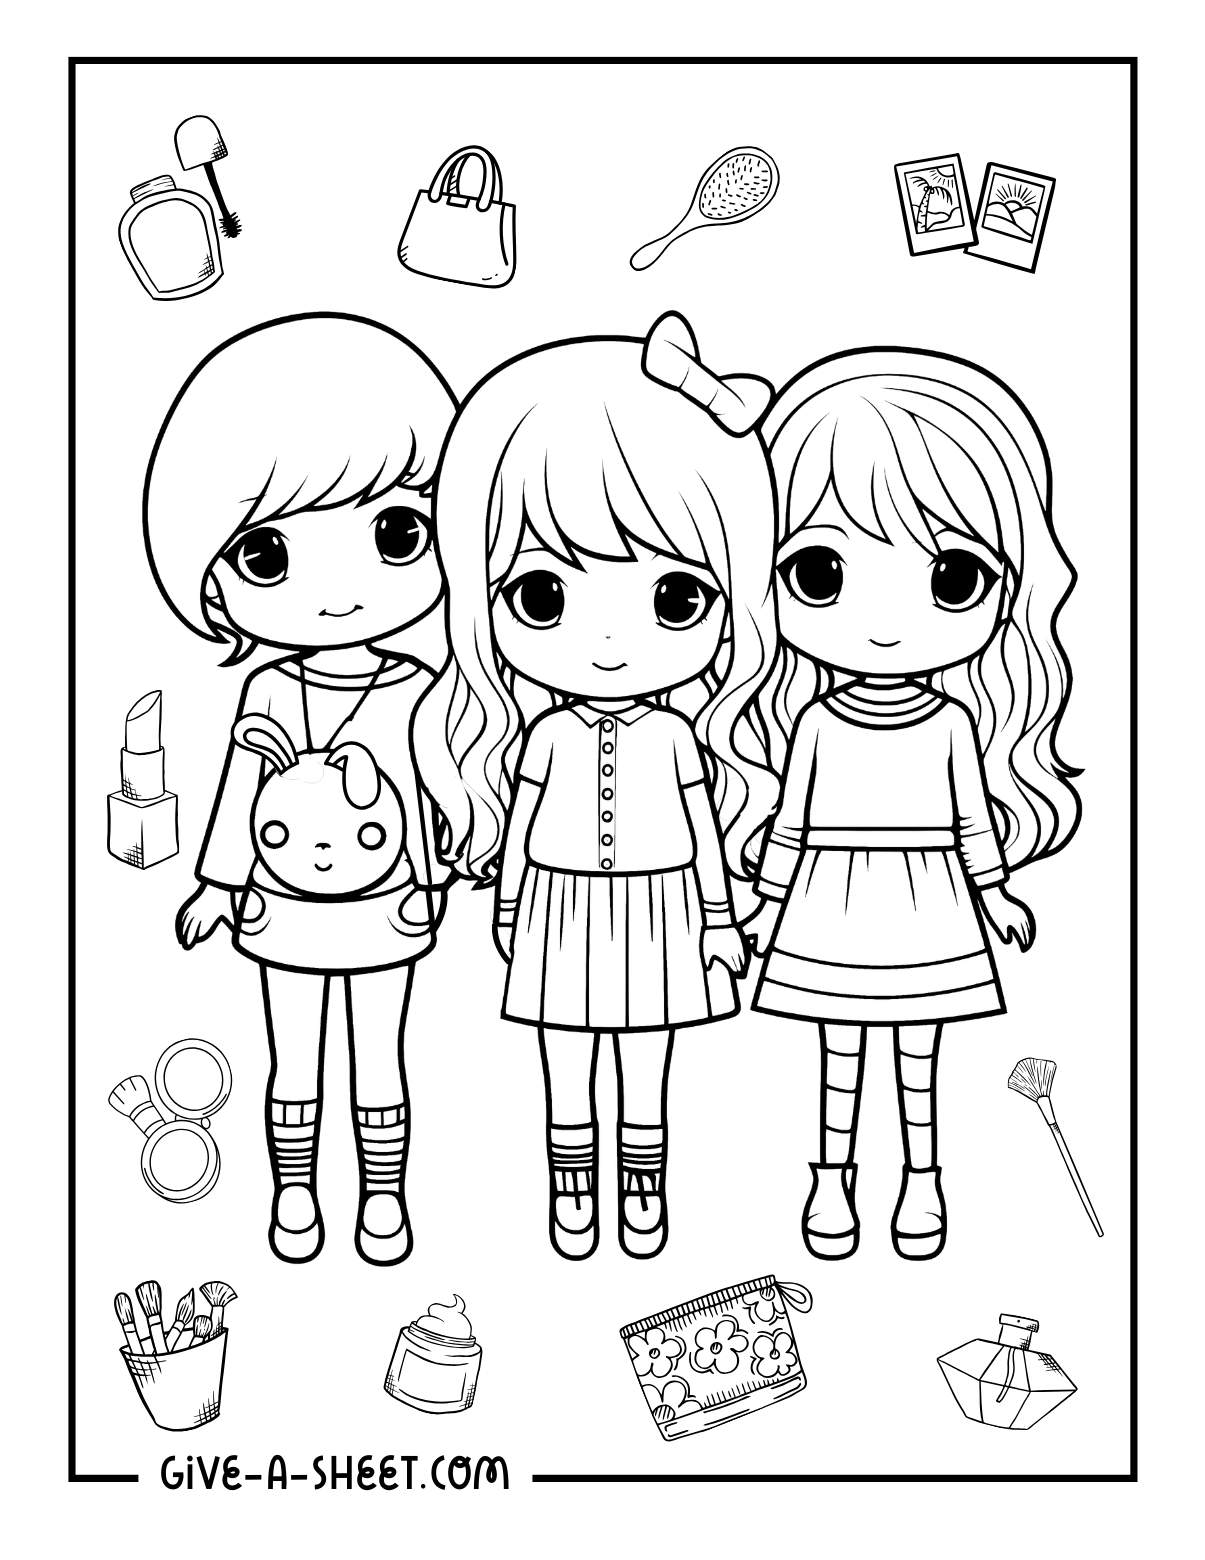 Girl 3 best friends coloring page wearing makeup.